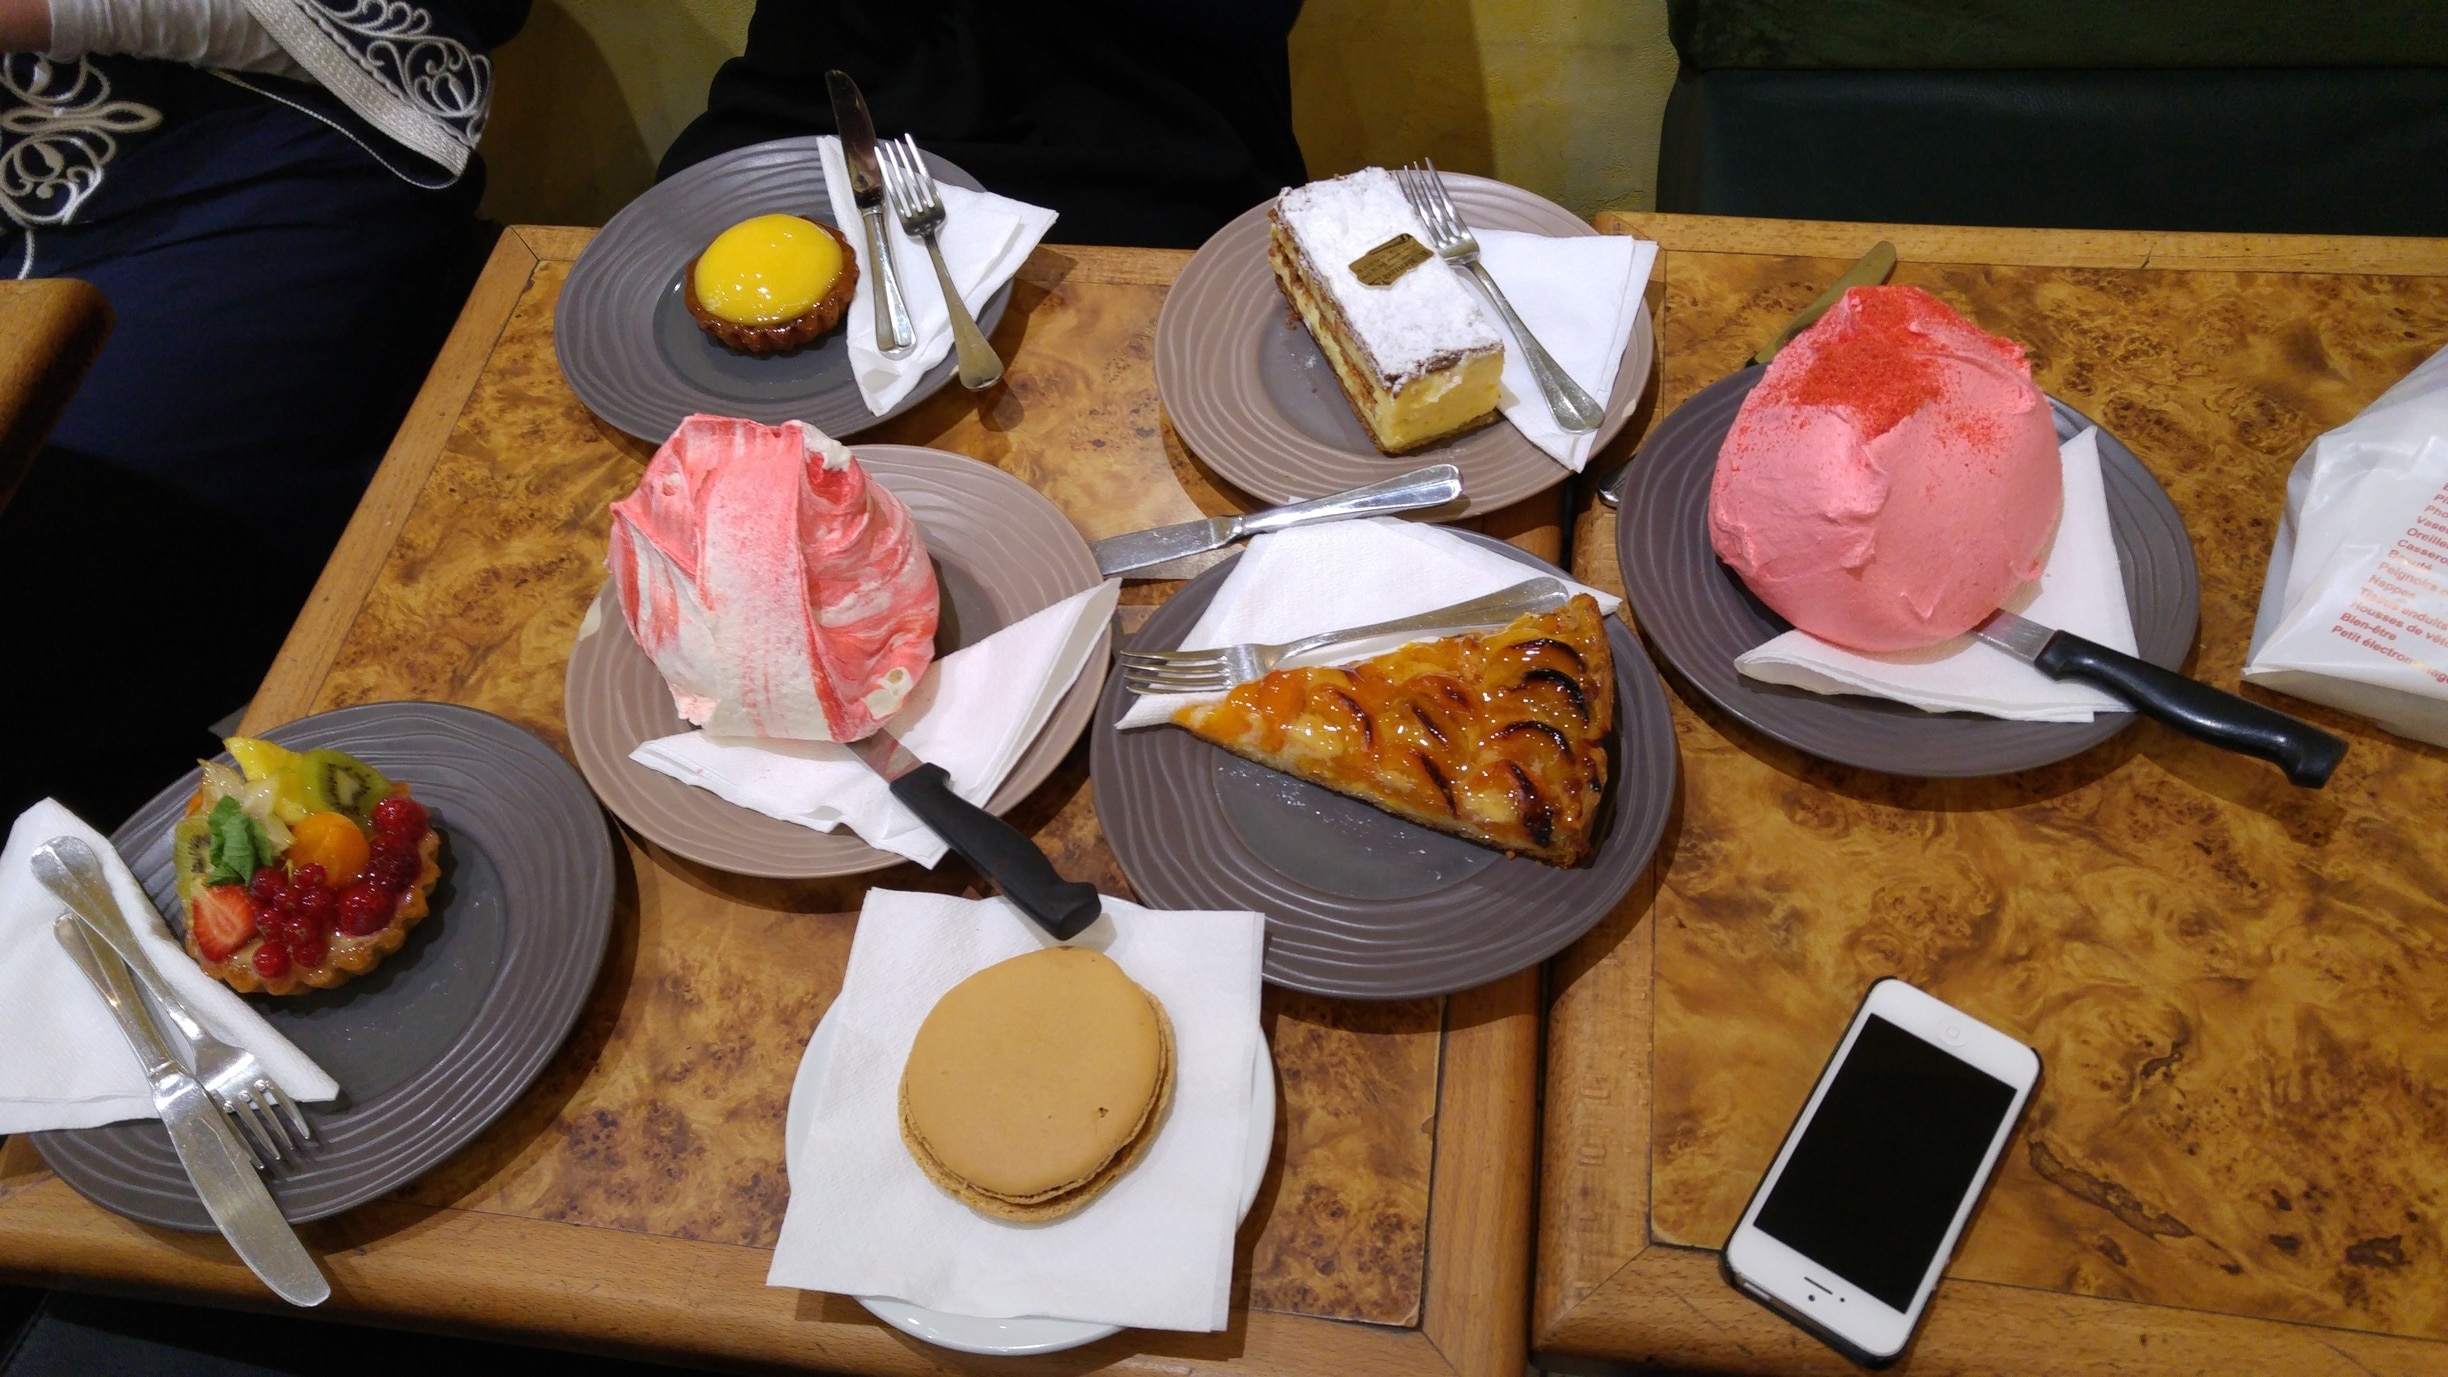 Enjoying the French patisserie in Paris 